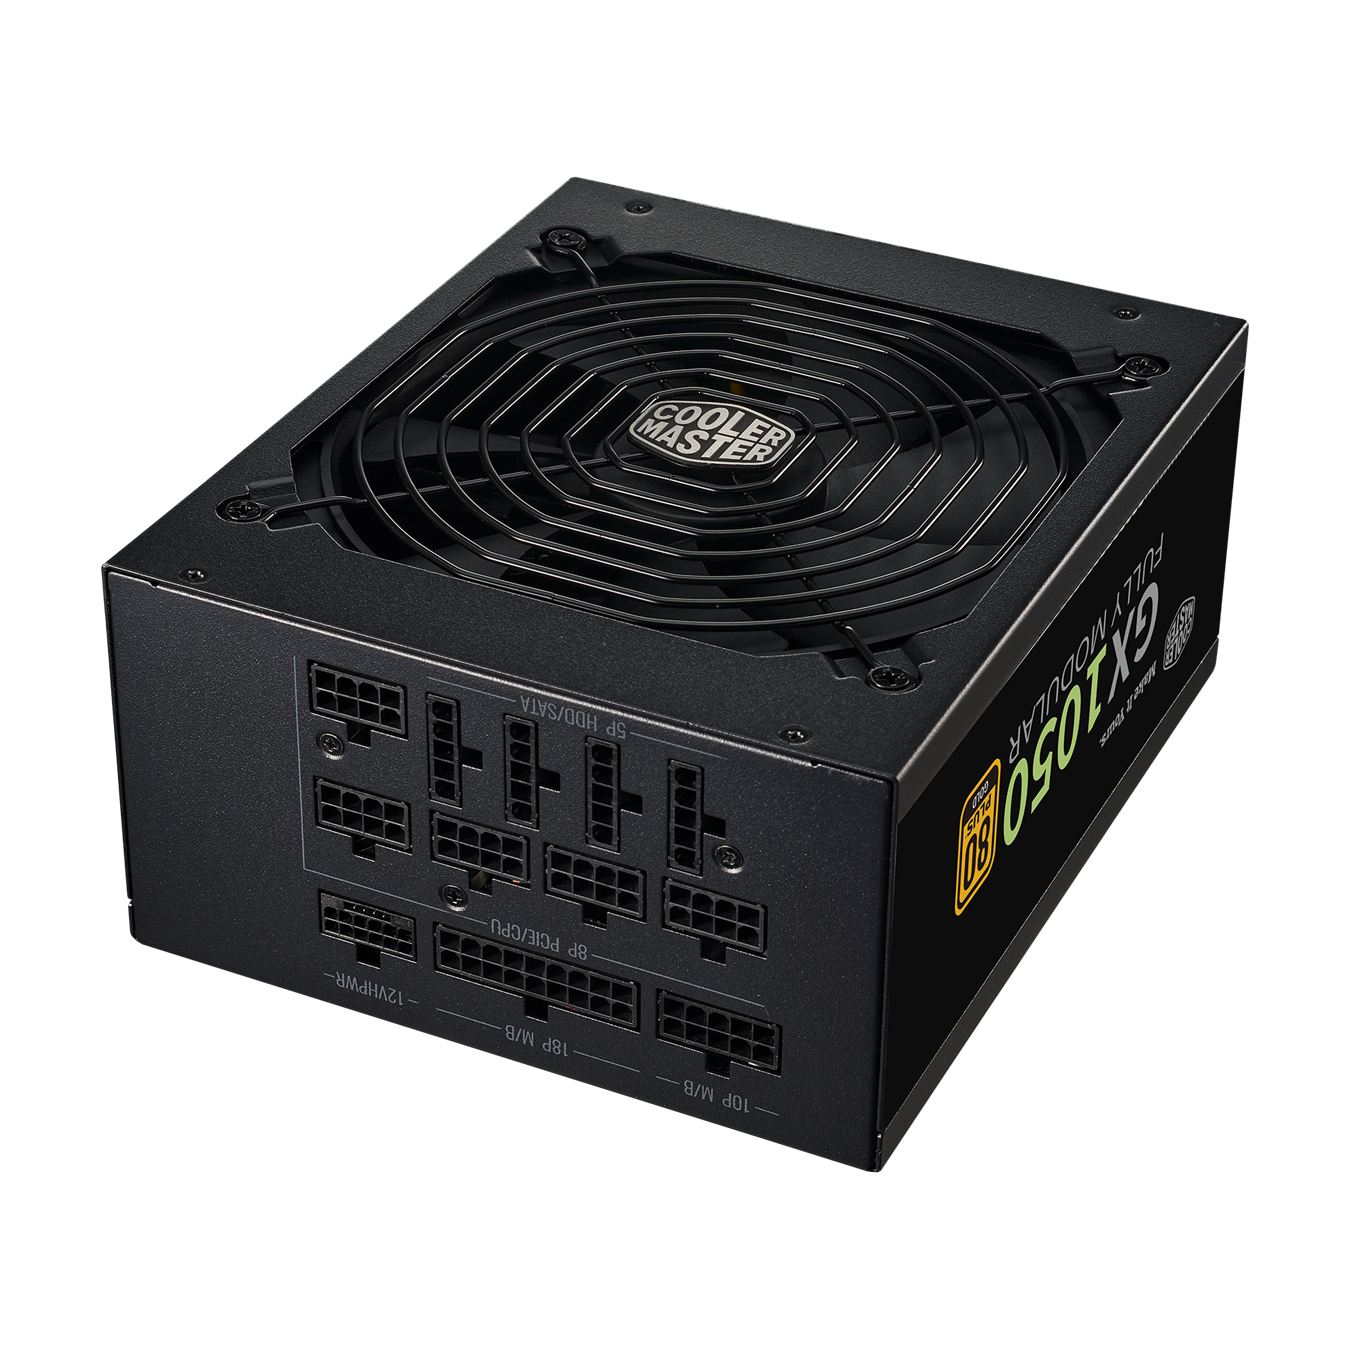 GX Gold 1050 comes with full modular flat, black cables for increased airflow.